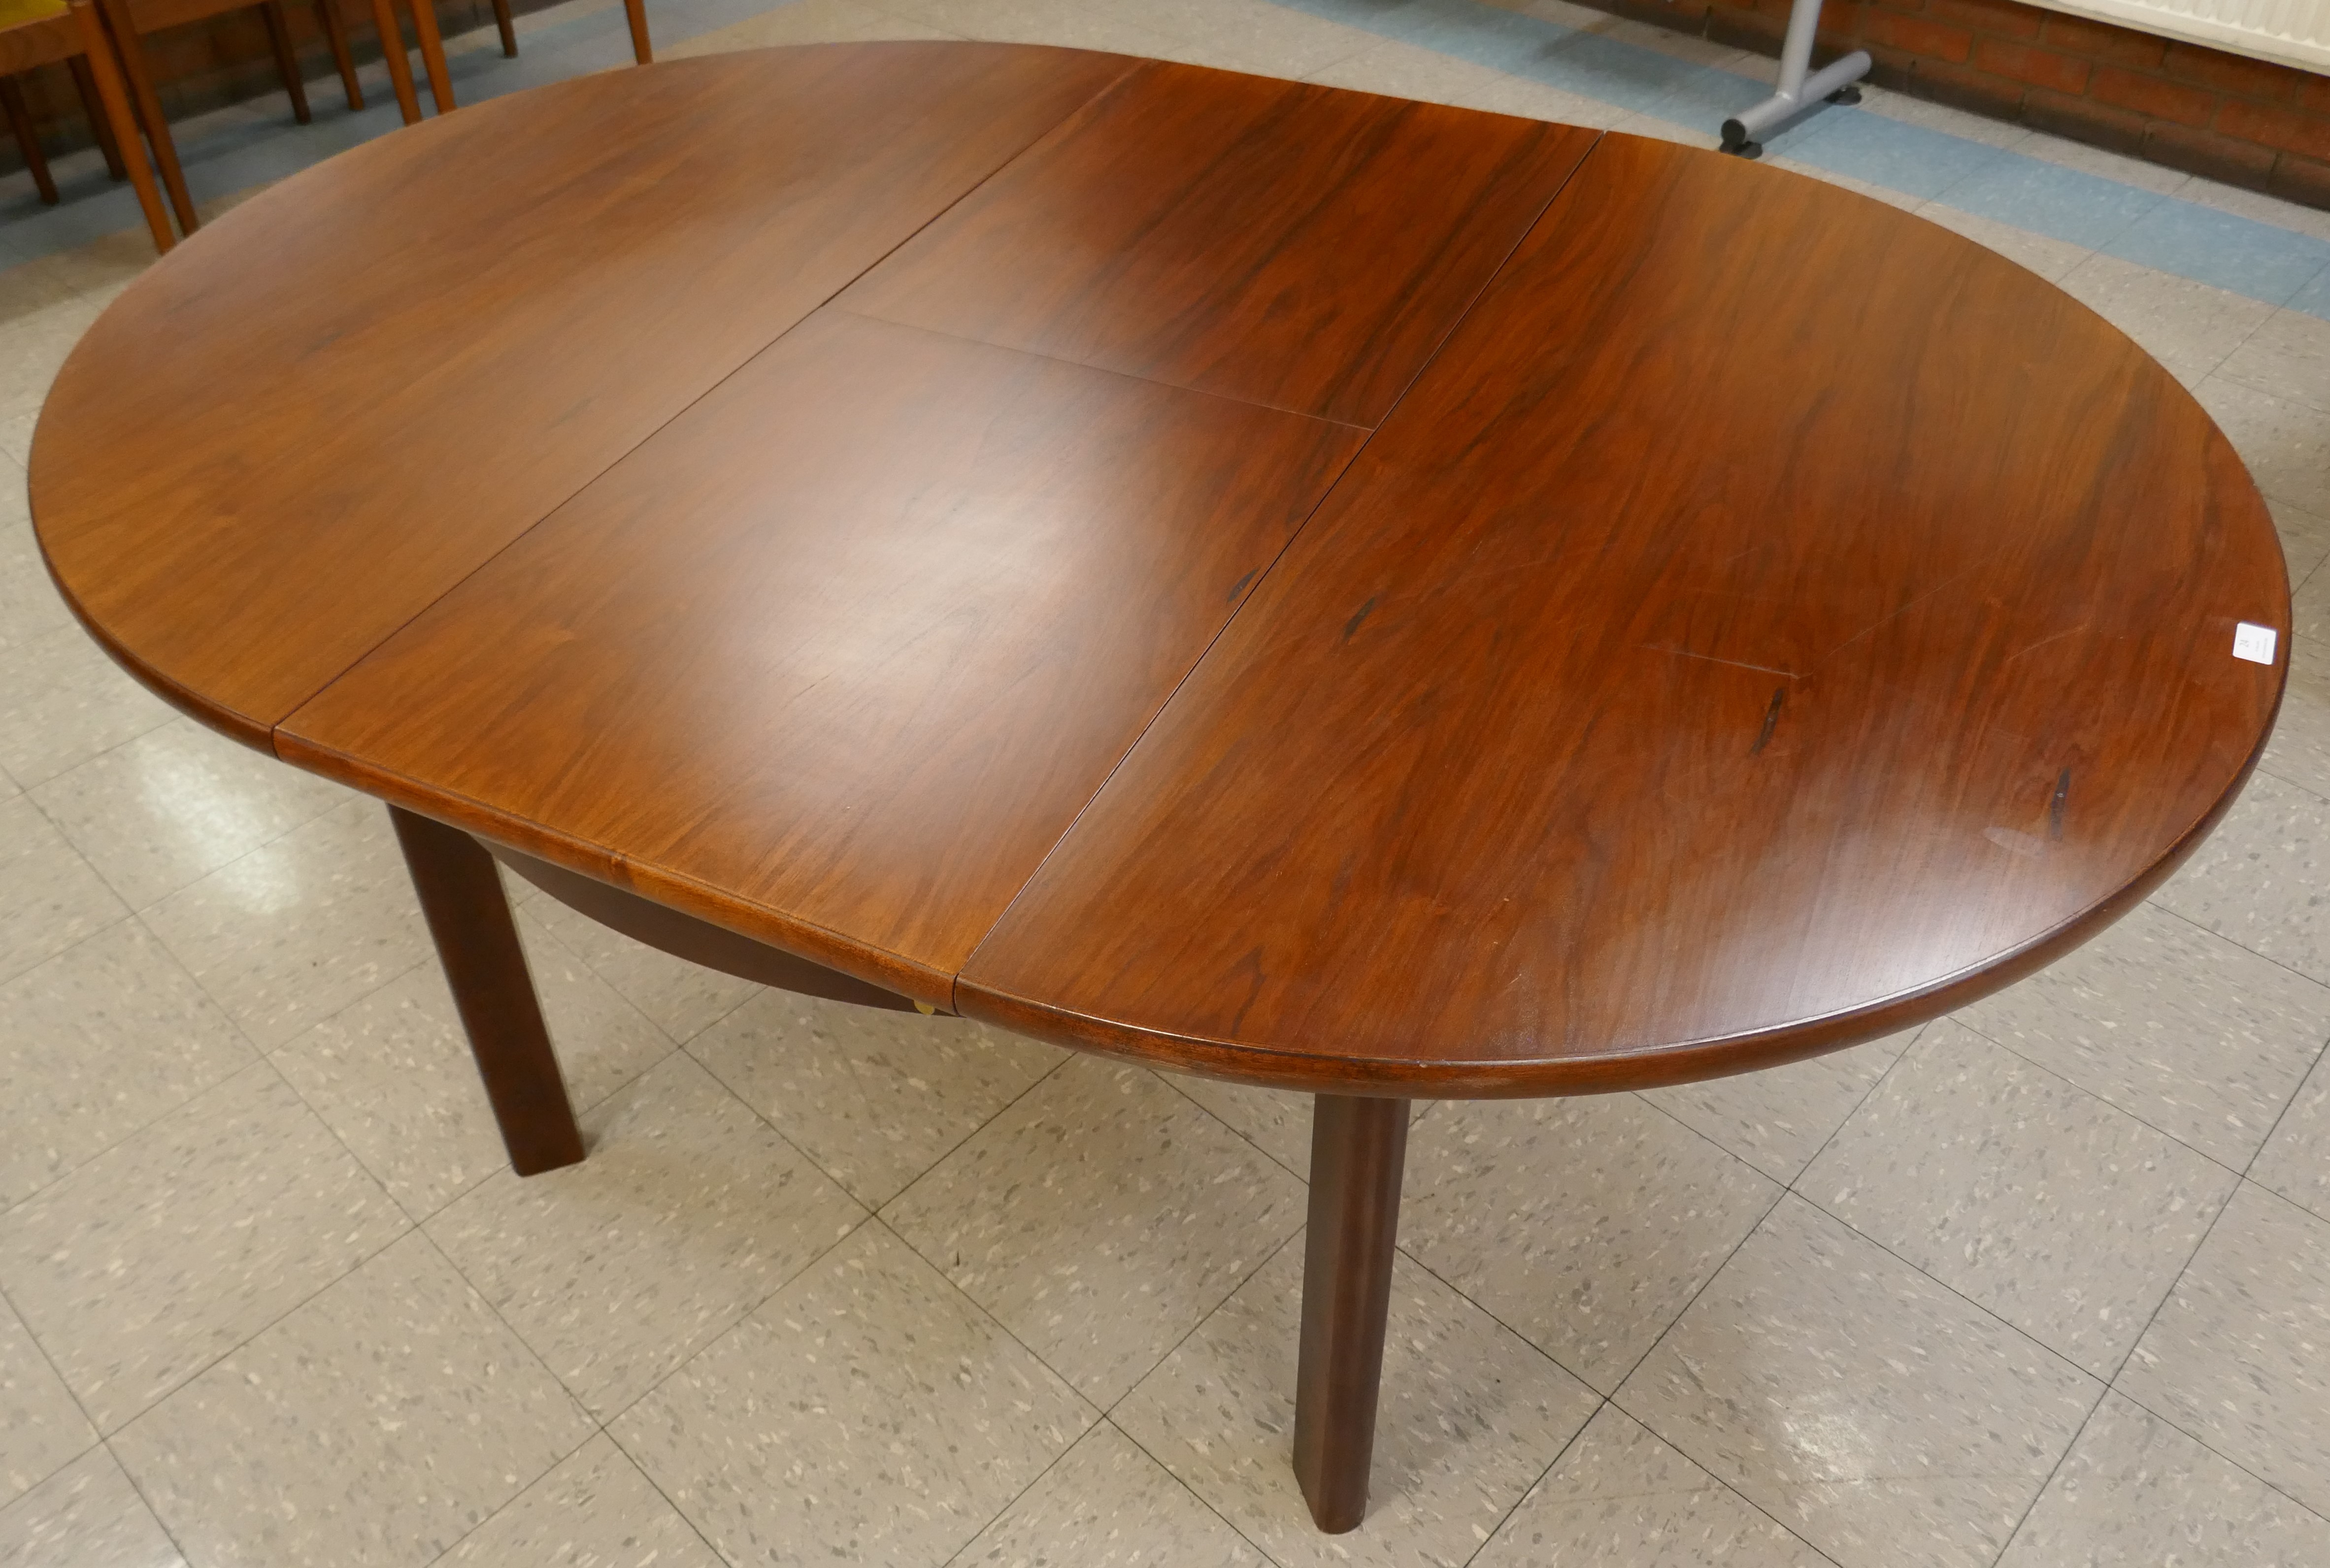 A Danish rosewood circular extending dining table. CITES A10 no. 24GBA10V19RFP - Image 4 of 4